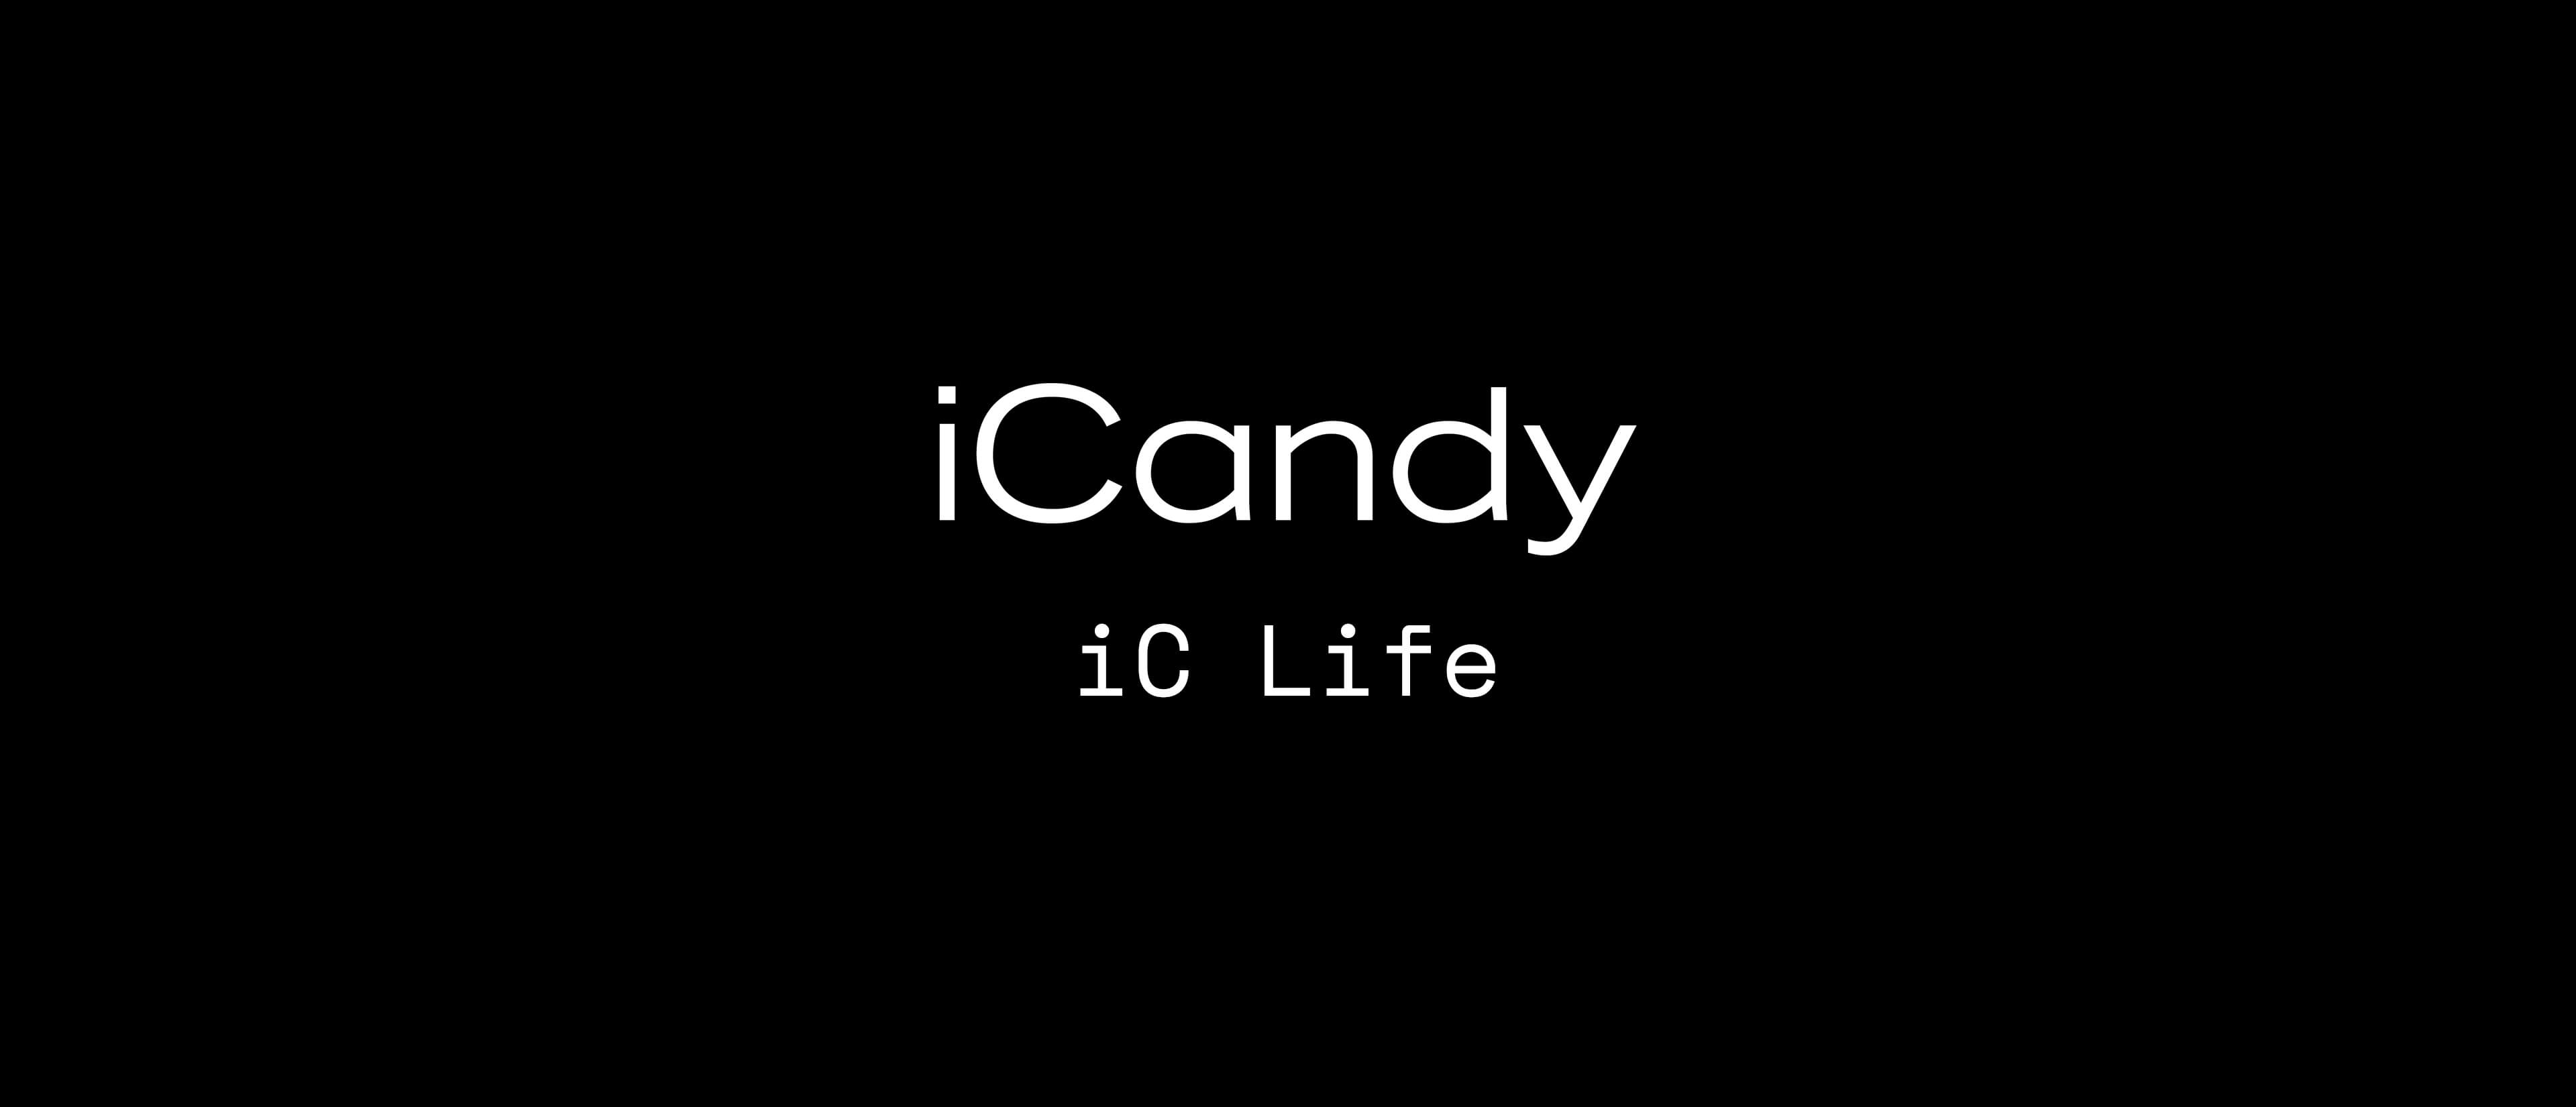 Hello iCandy Mums and Dads